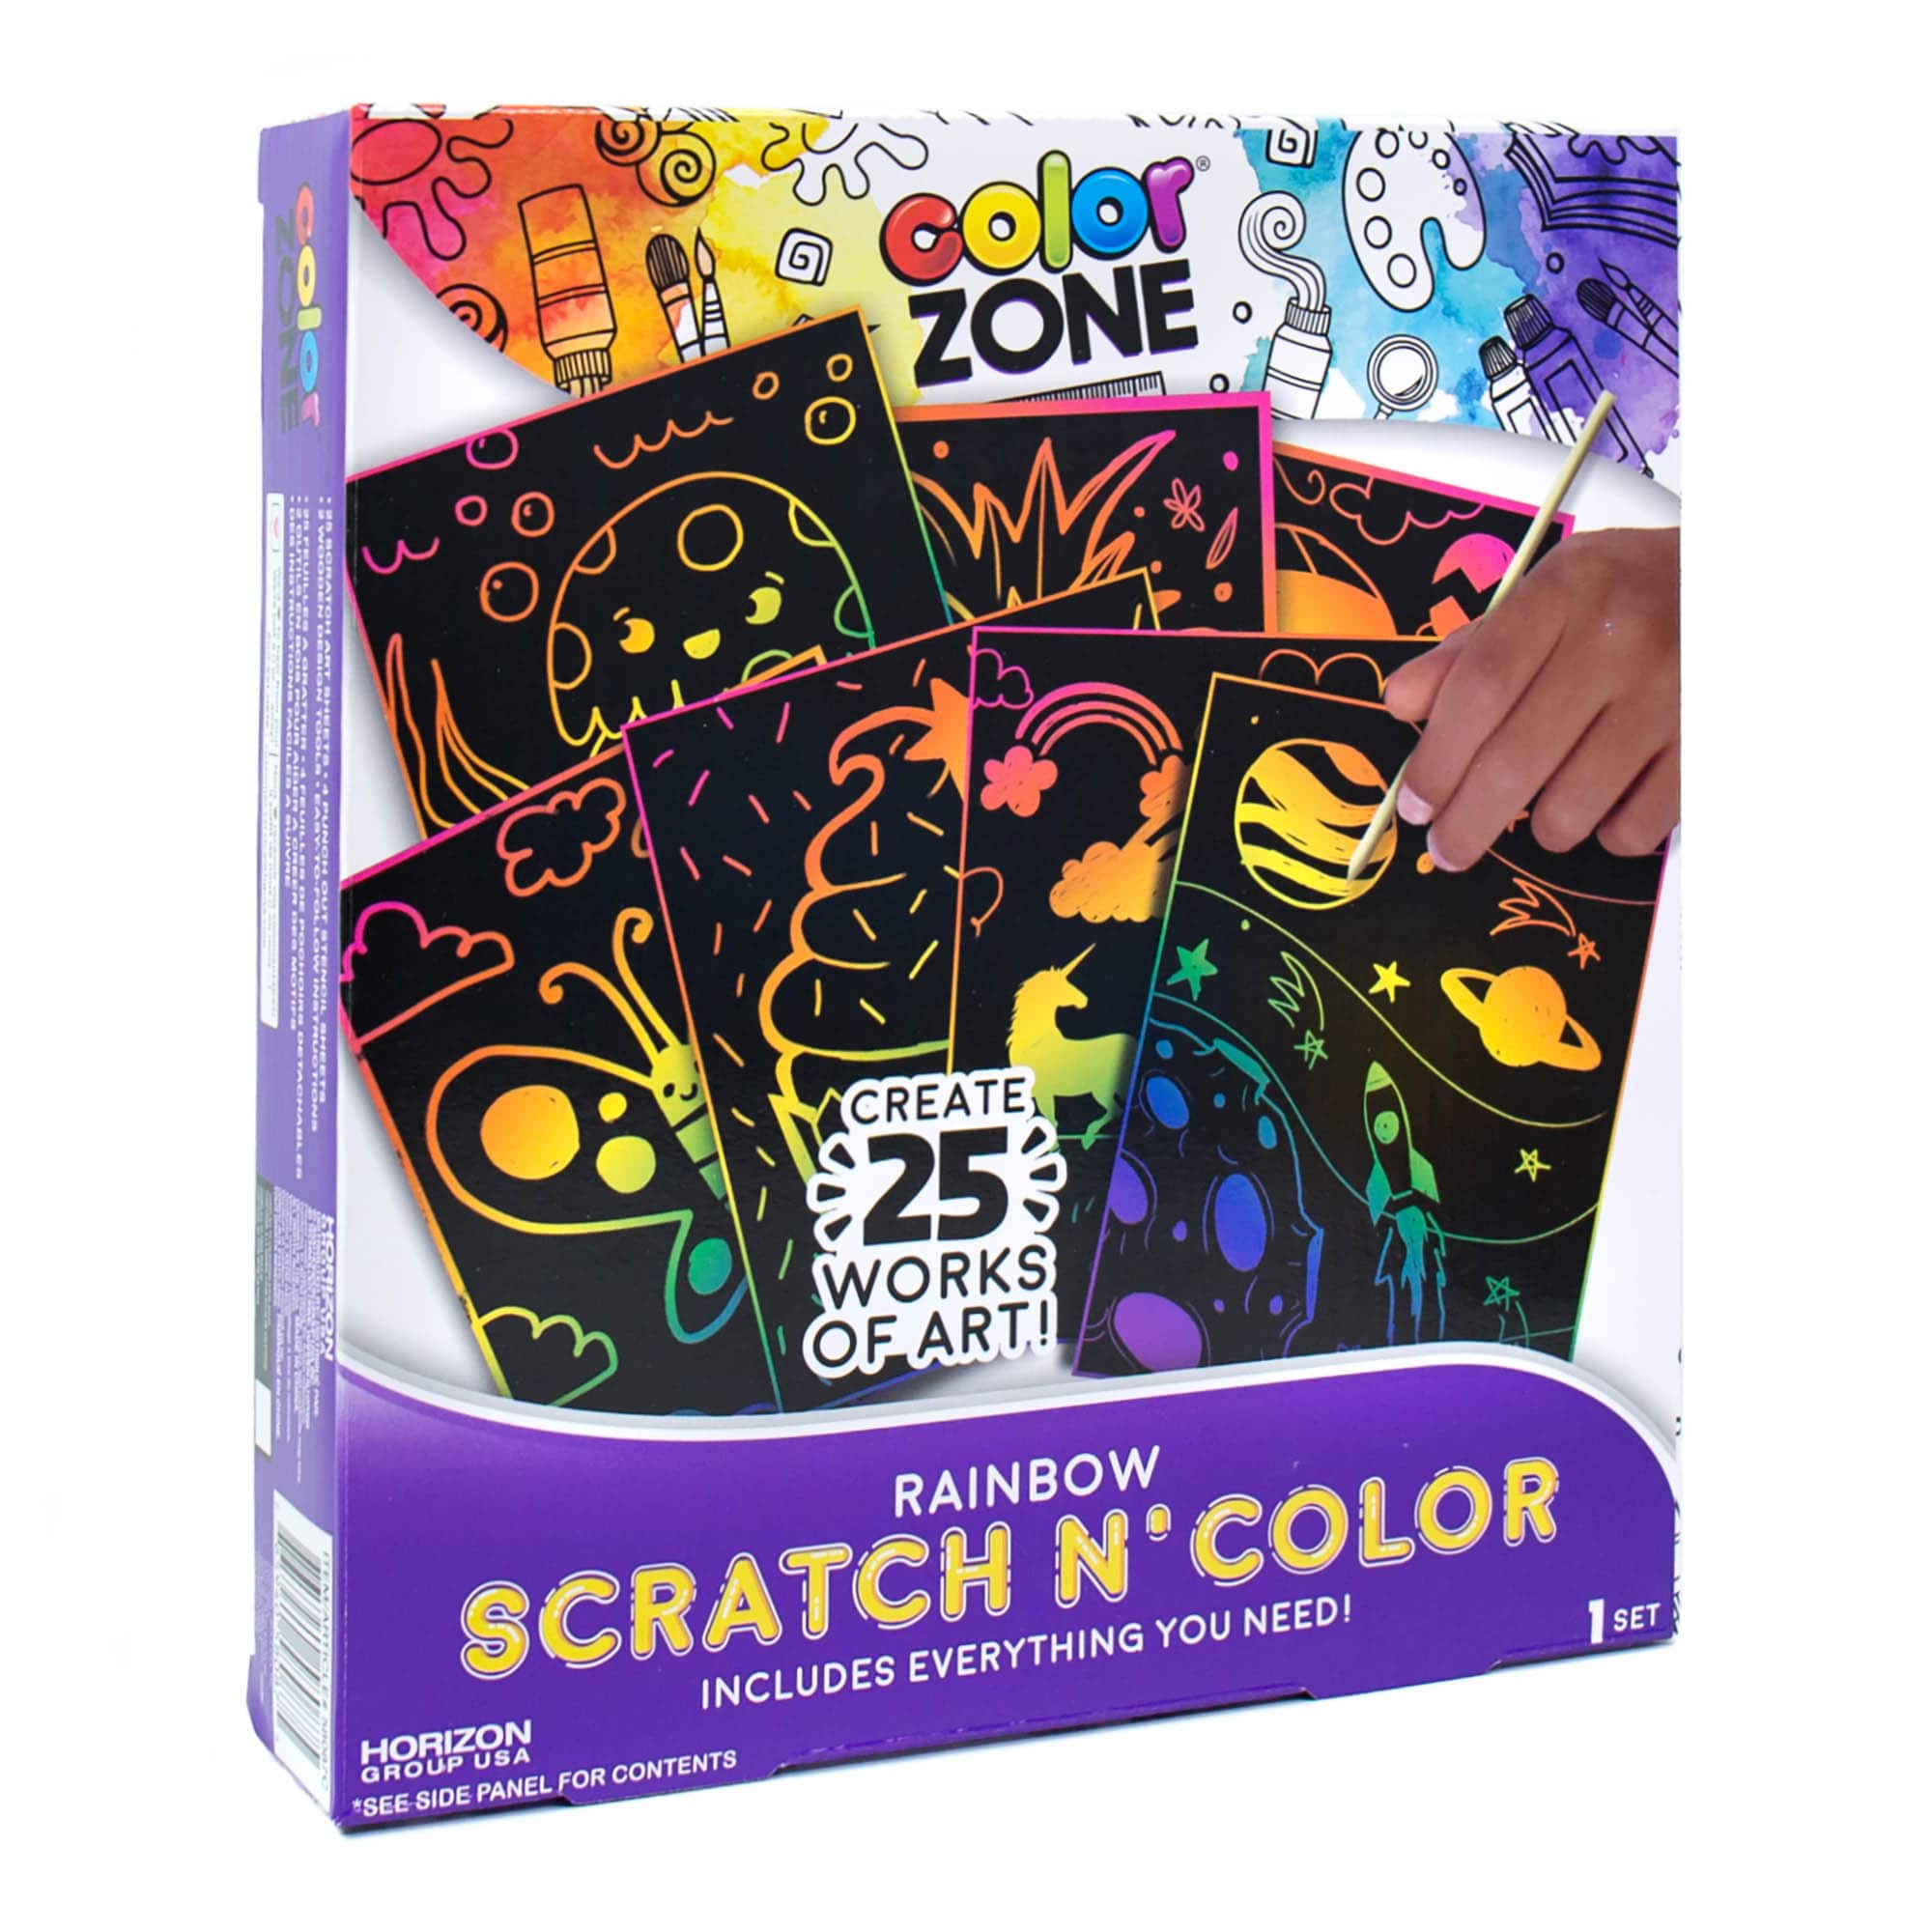 Color Zone® Rainbow Scratch N' Color